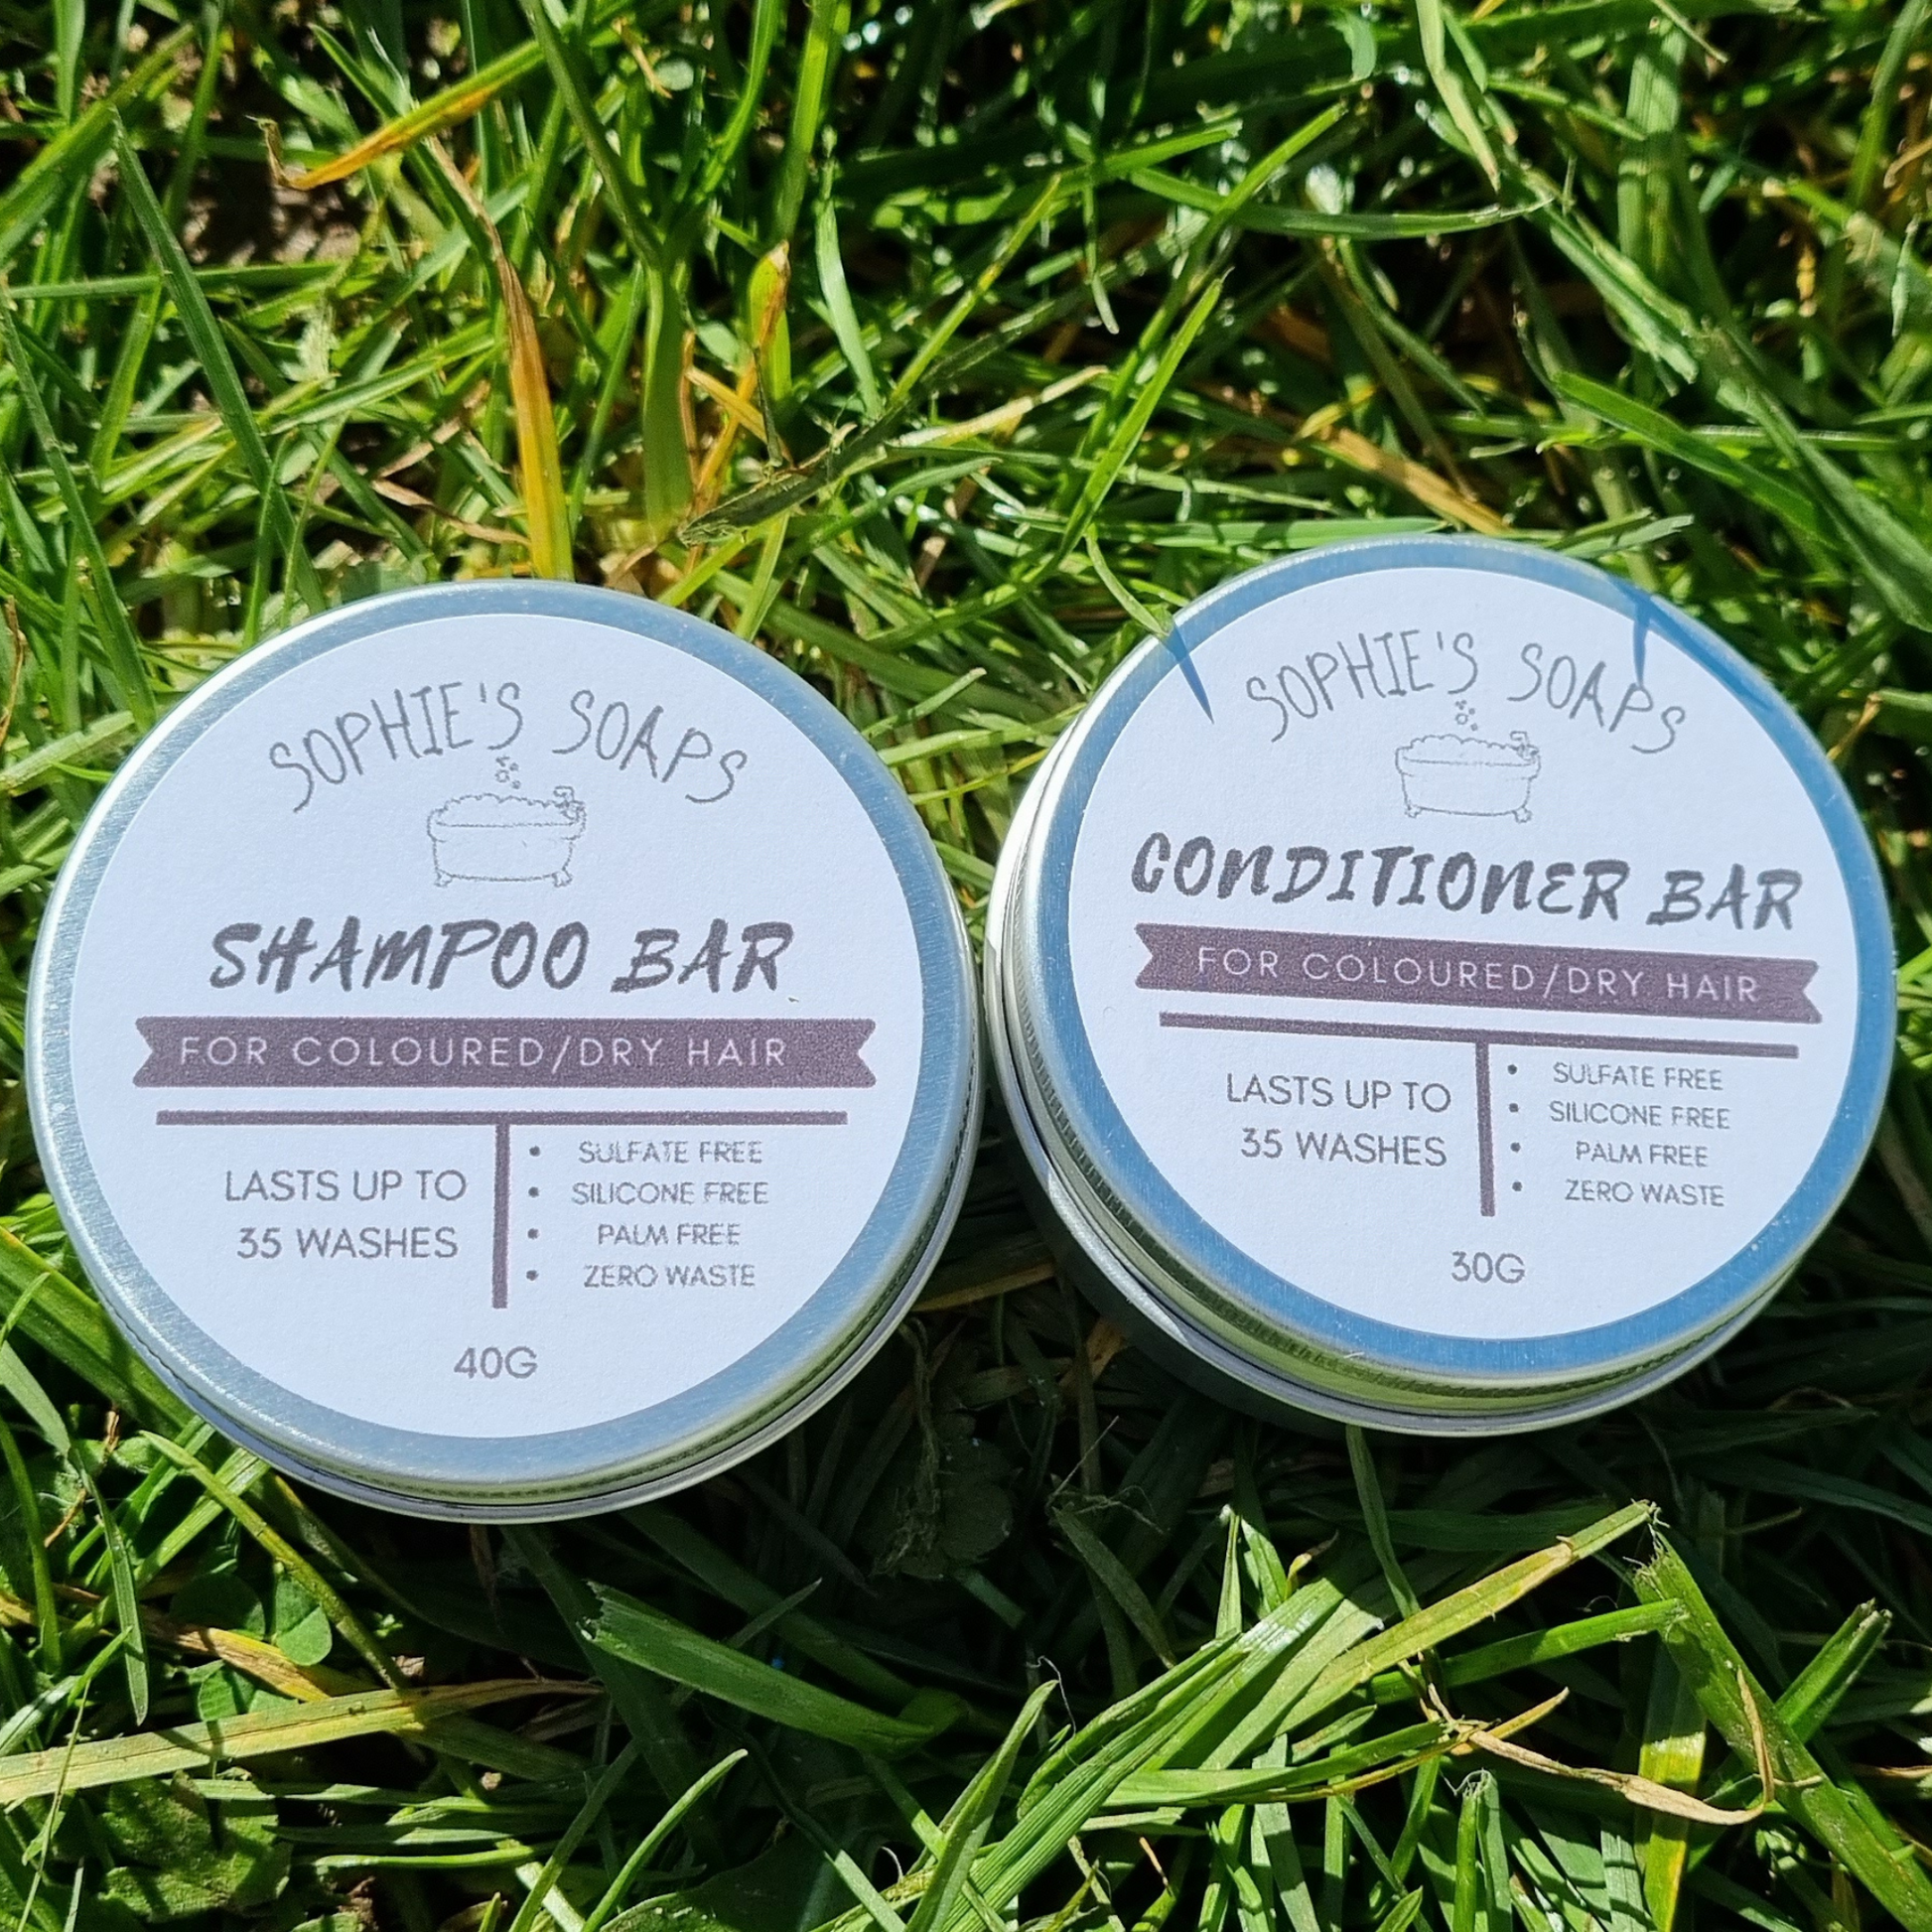 Coloured/Dry Hair Shampoo & Conditioner - Sophie's Soaps